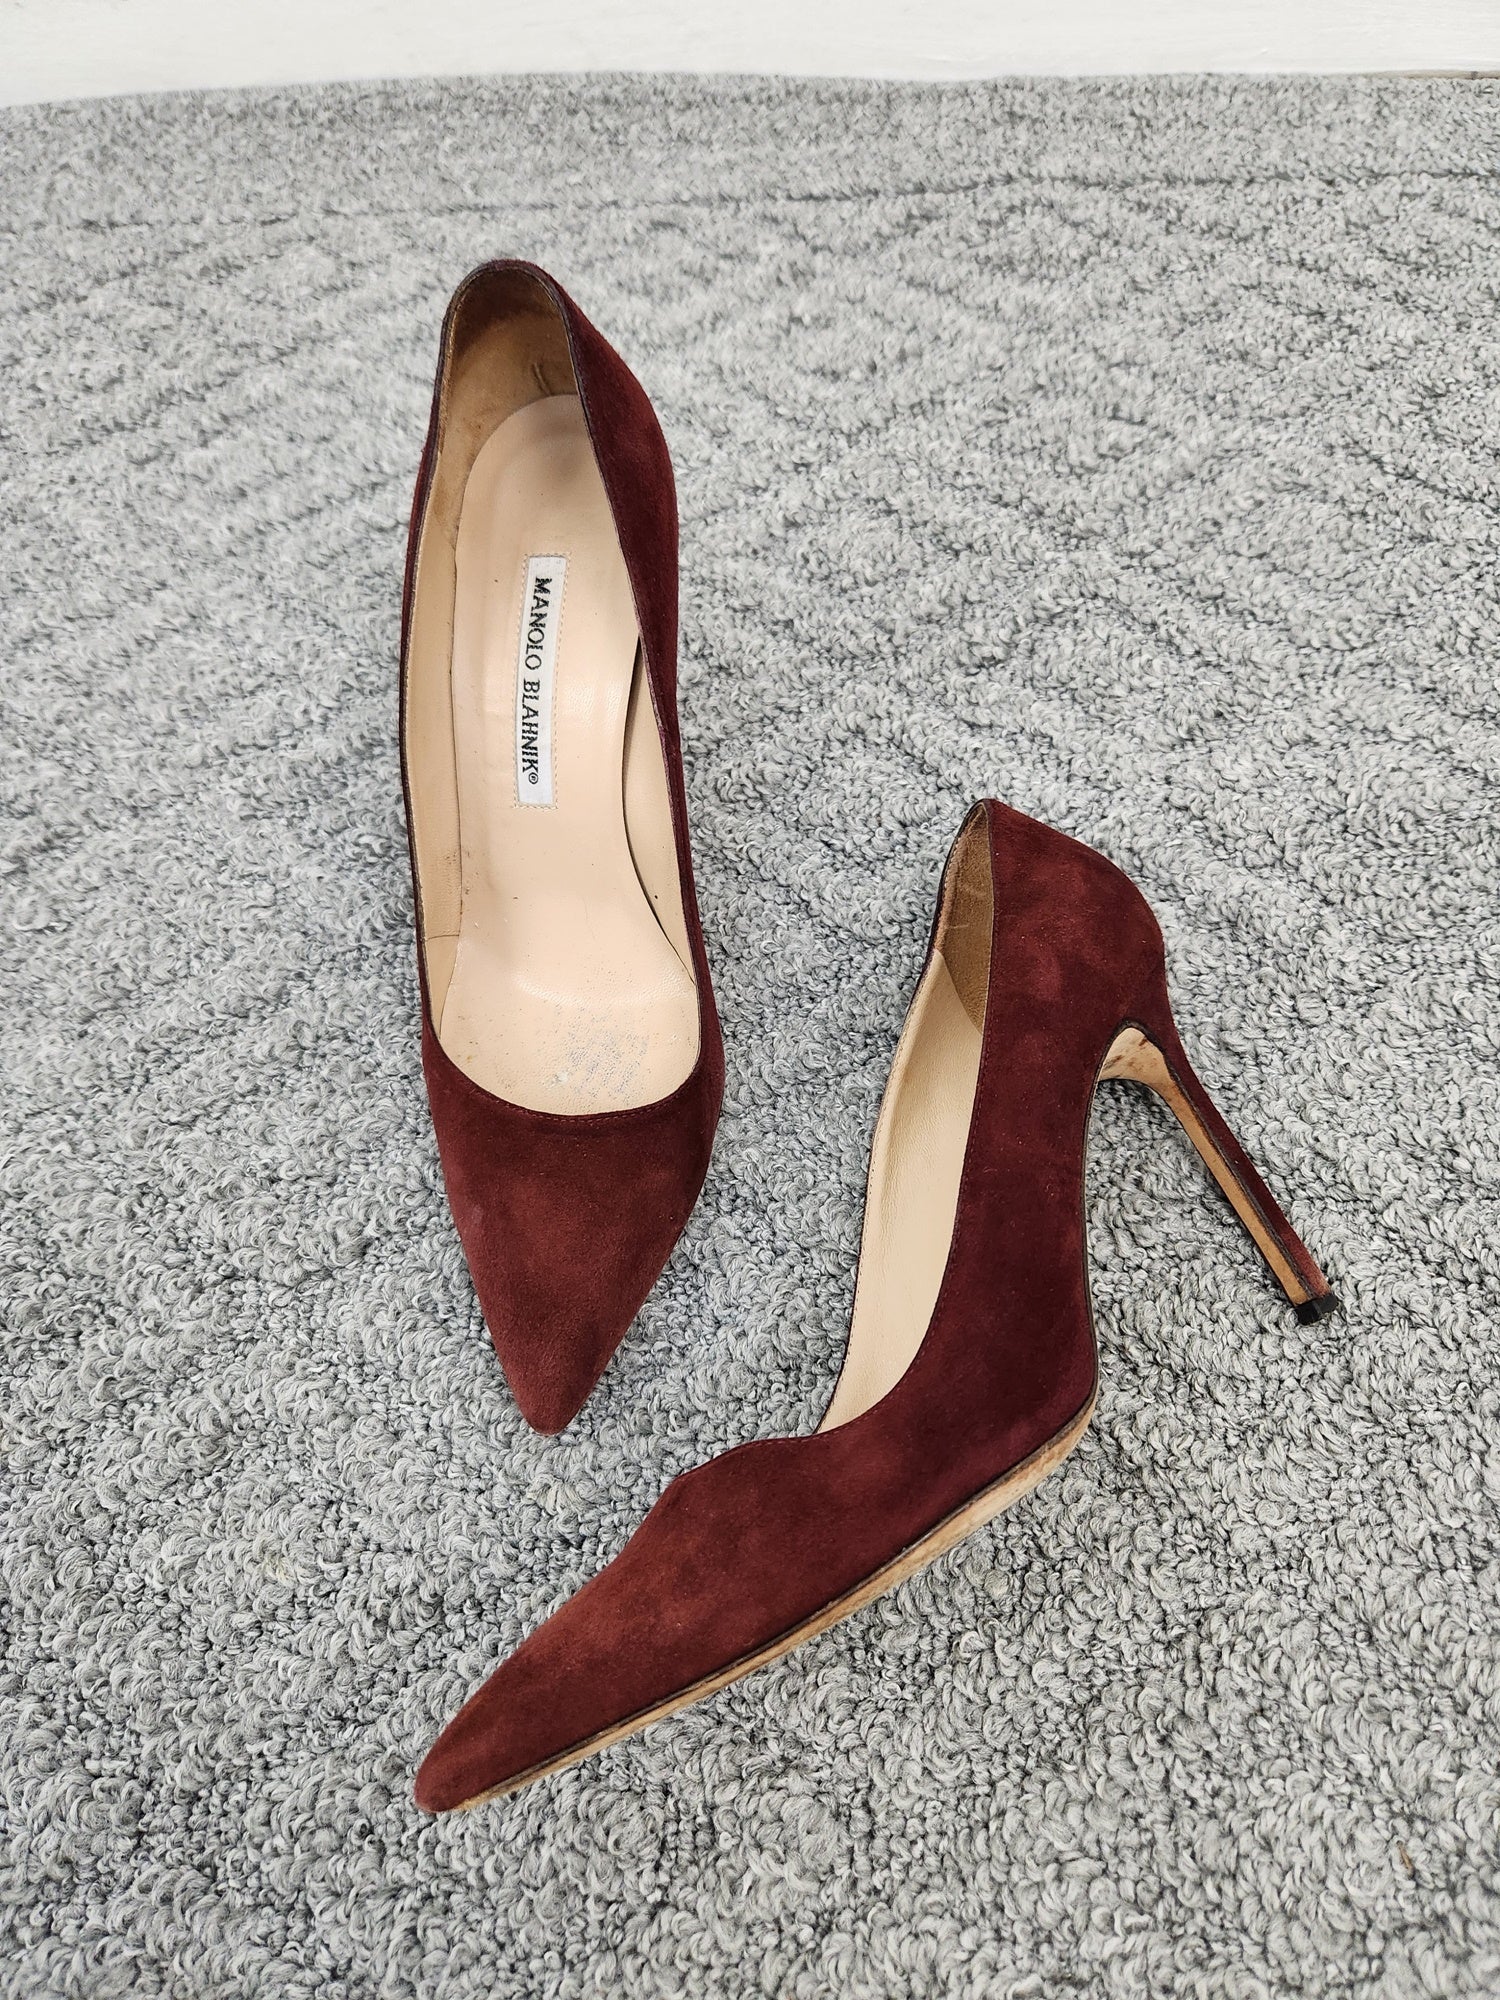 Pointed Toe Pumps Size 37.5